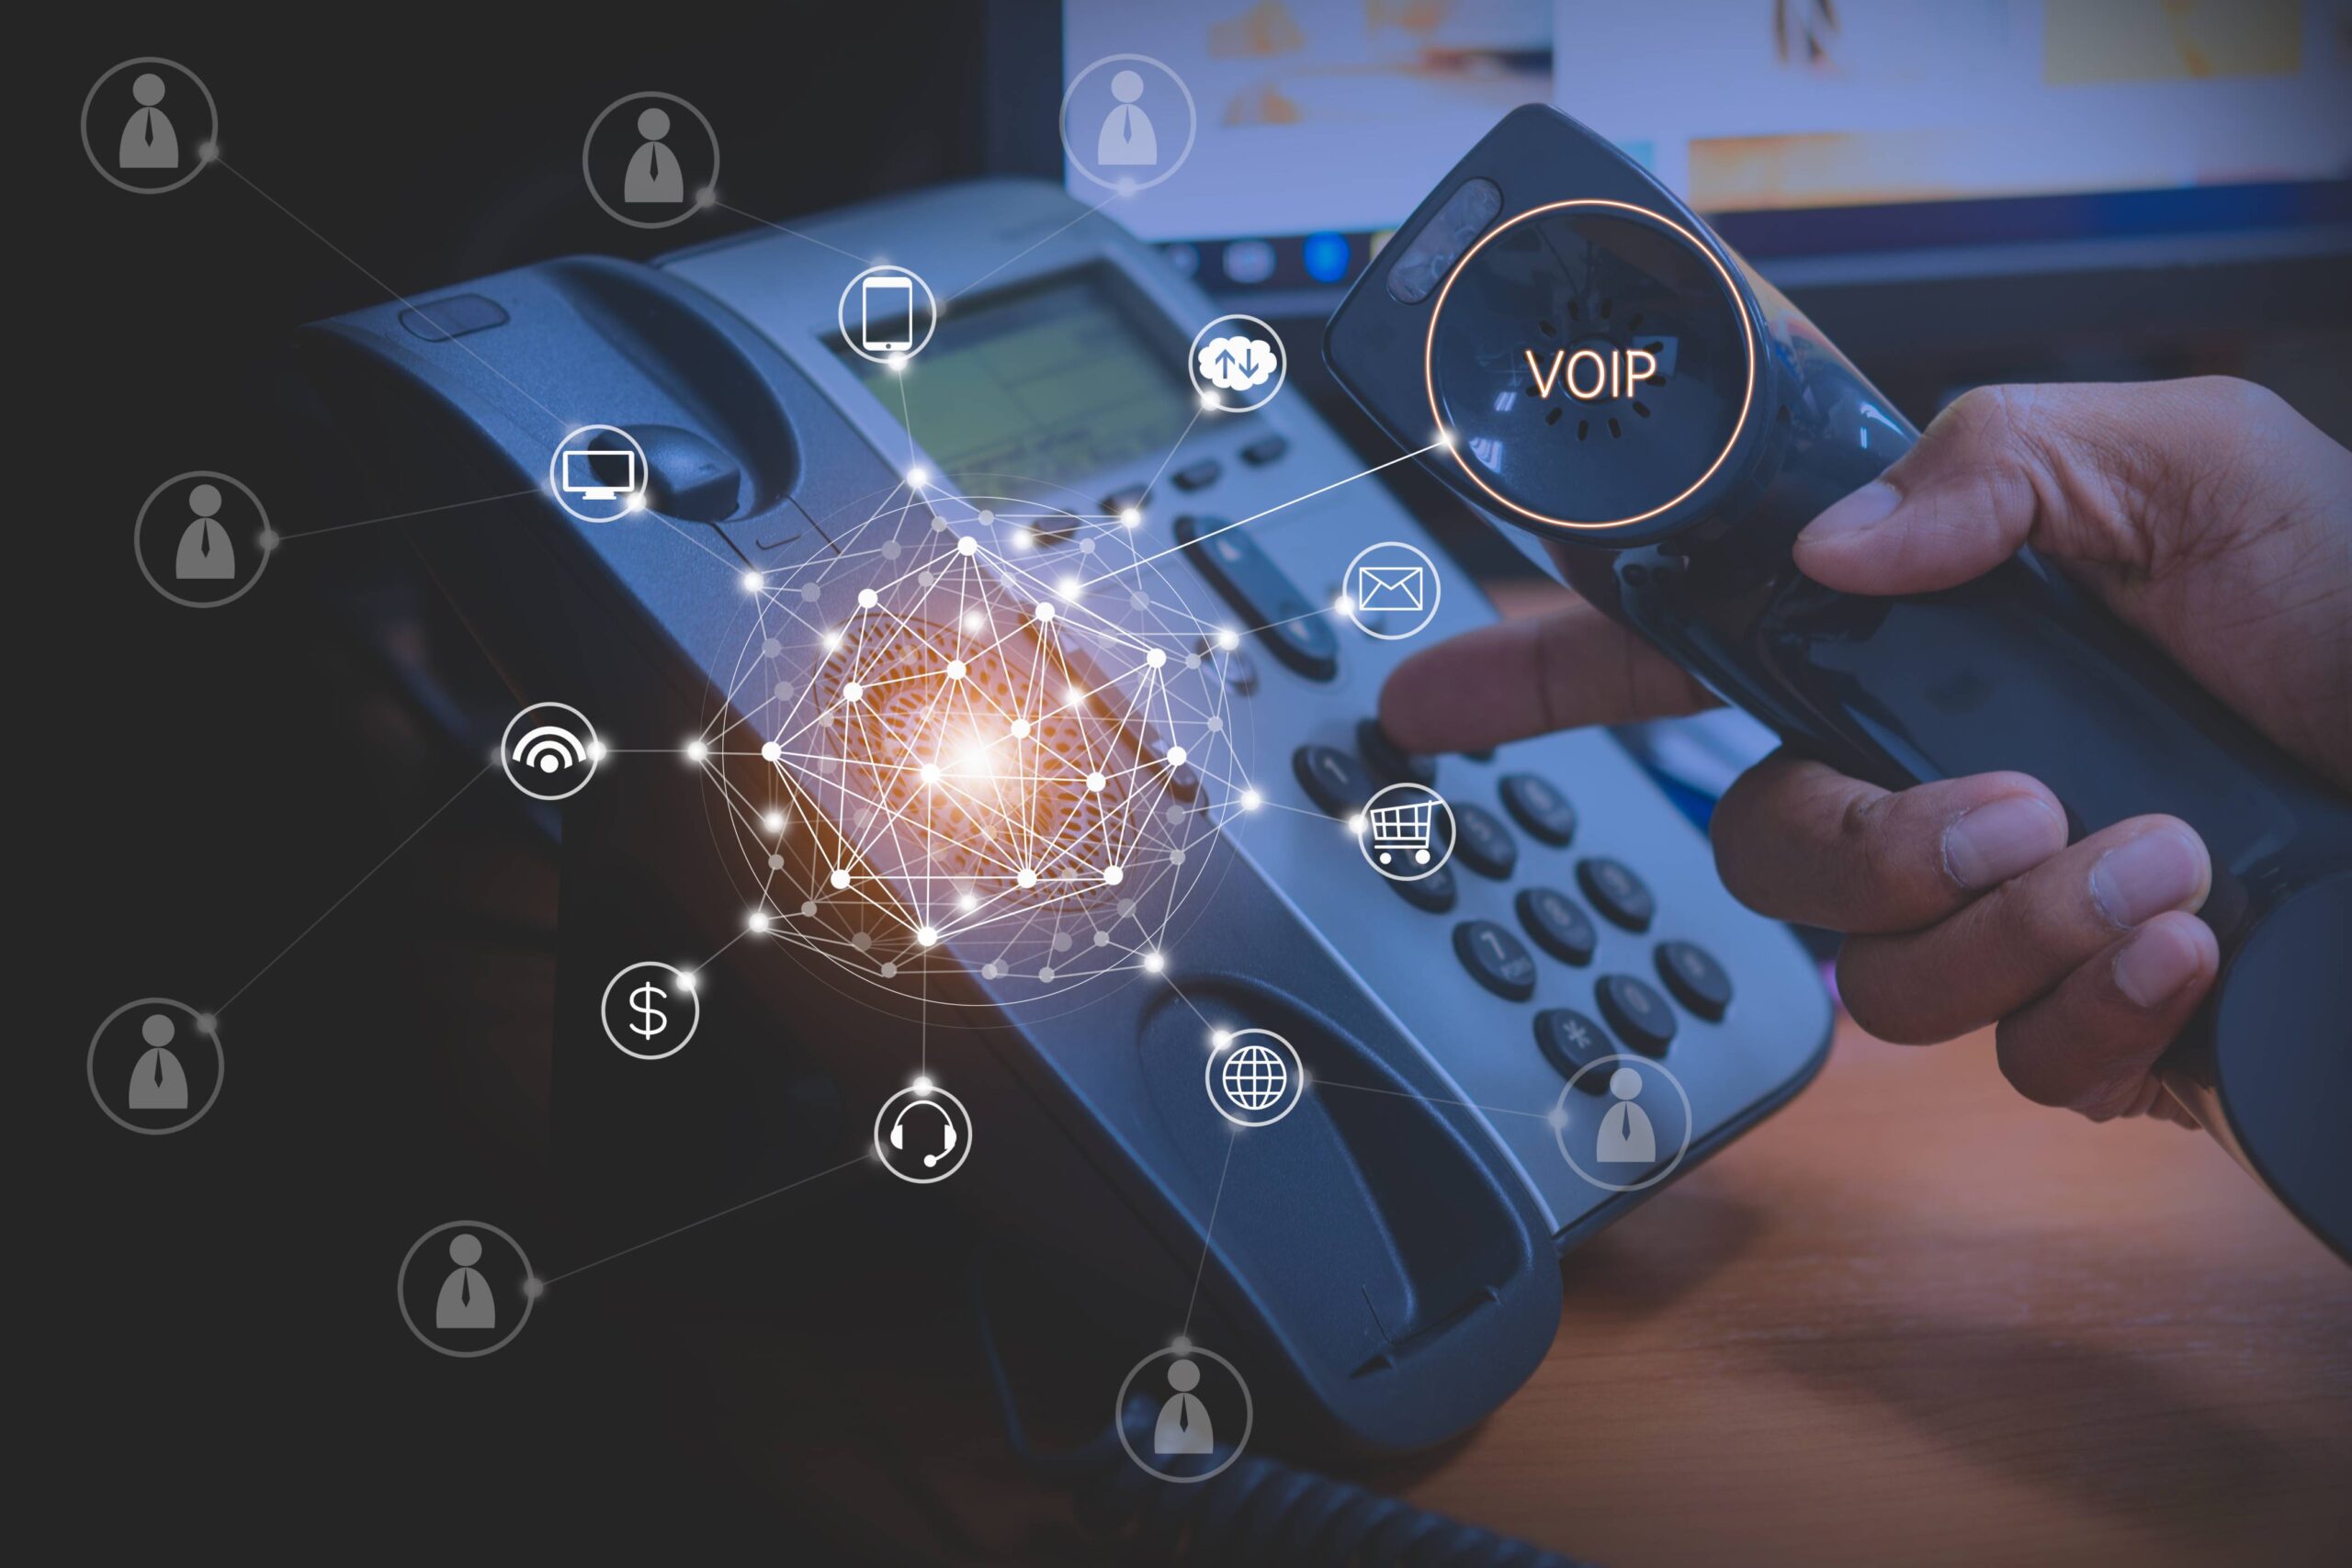 Telephone as a voip service concept in a photo